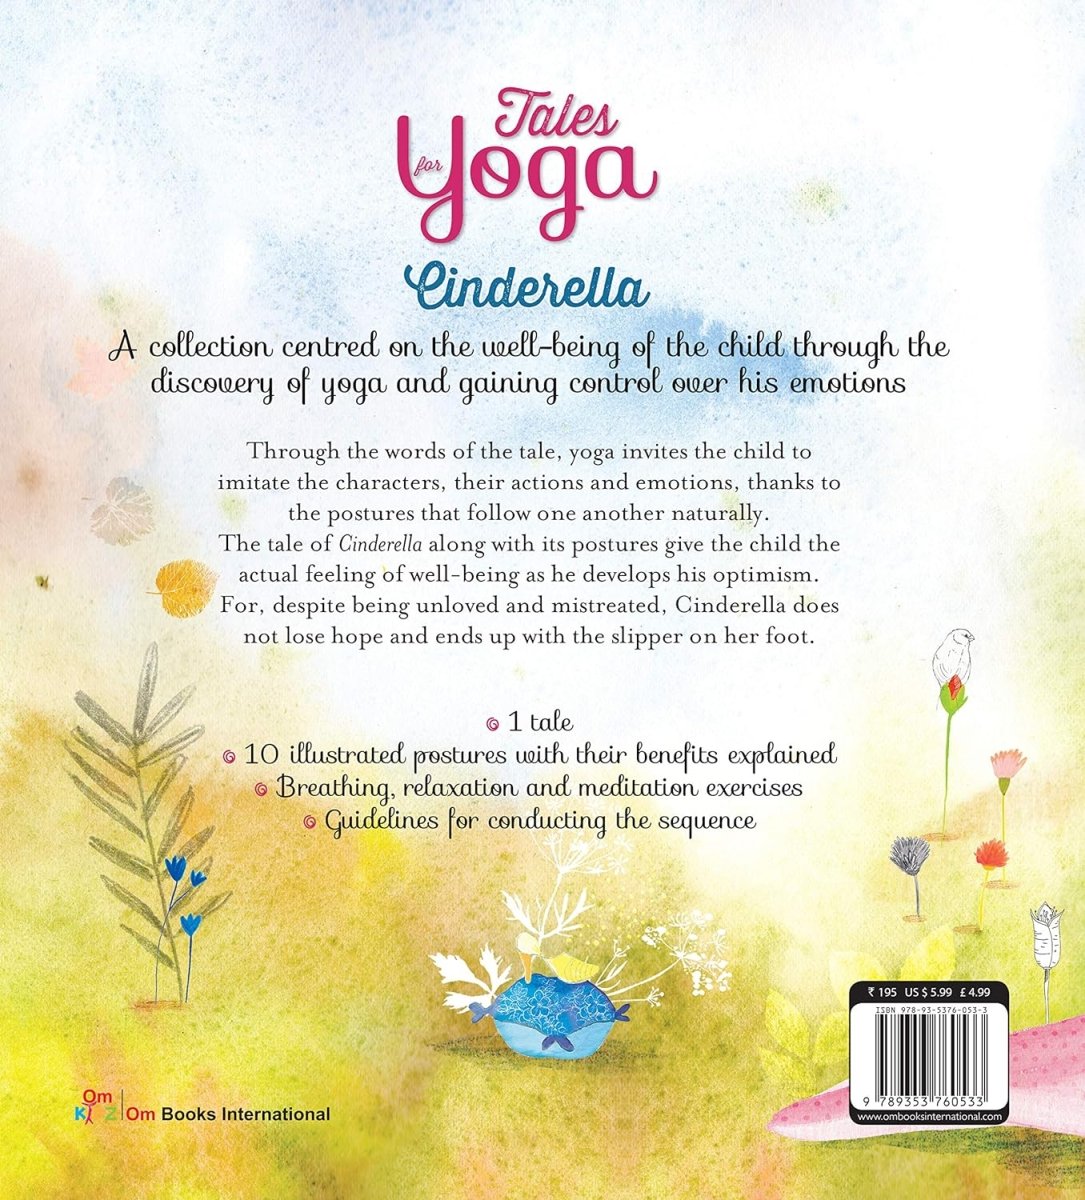 Om Books International Tales for Yoga : Cinderella A tale along with postures for being optimistic - 9789353760533